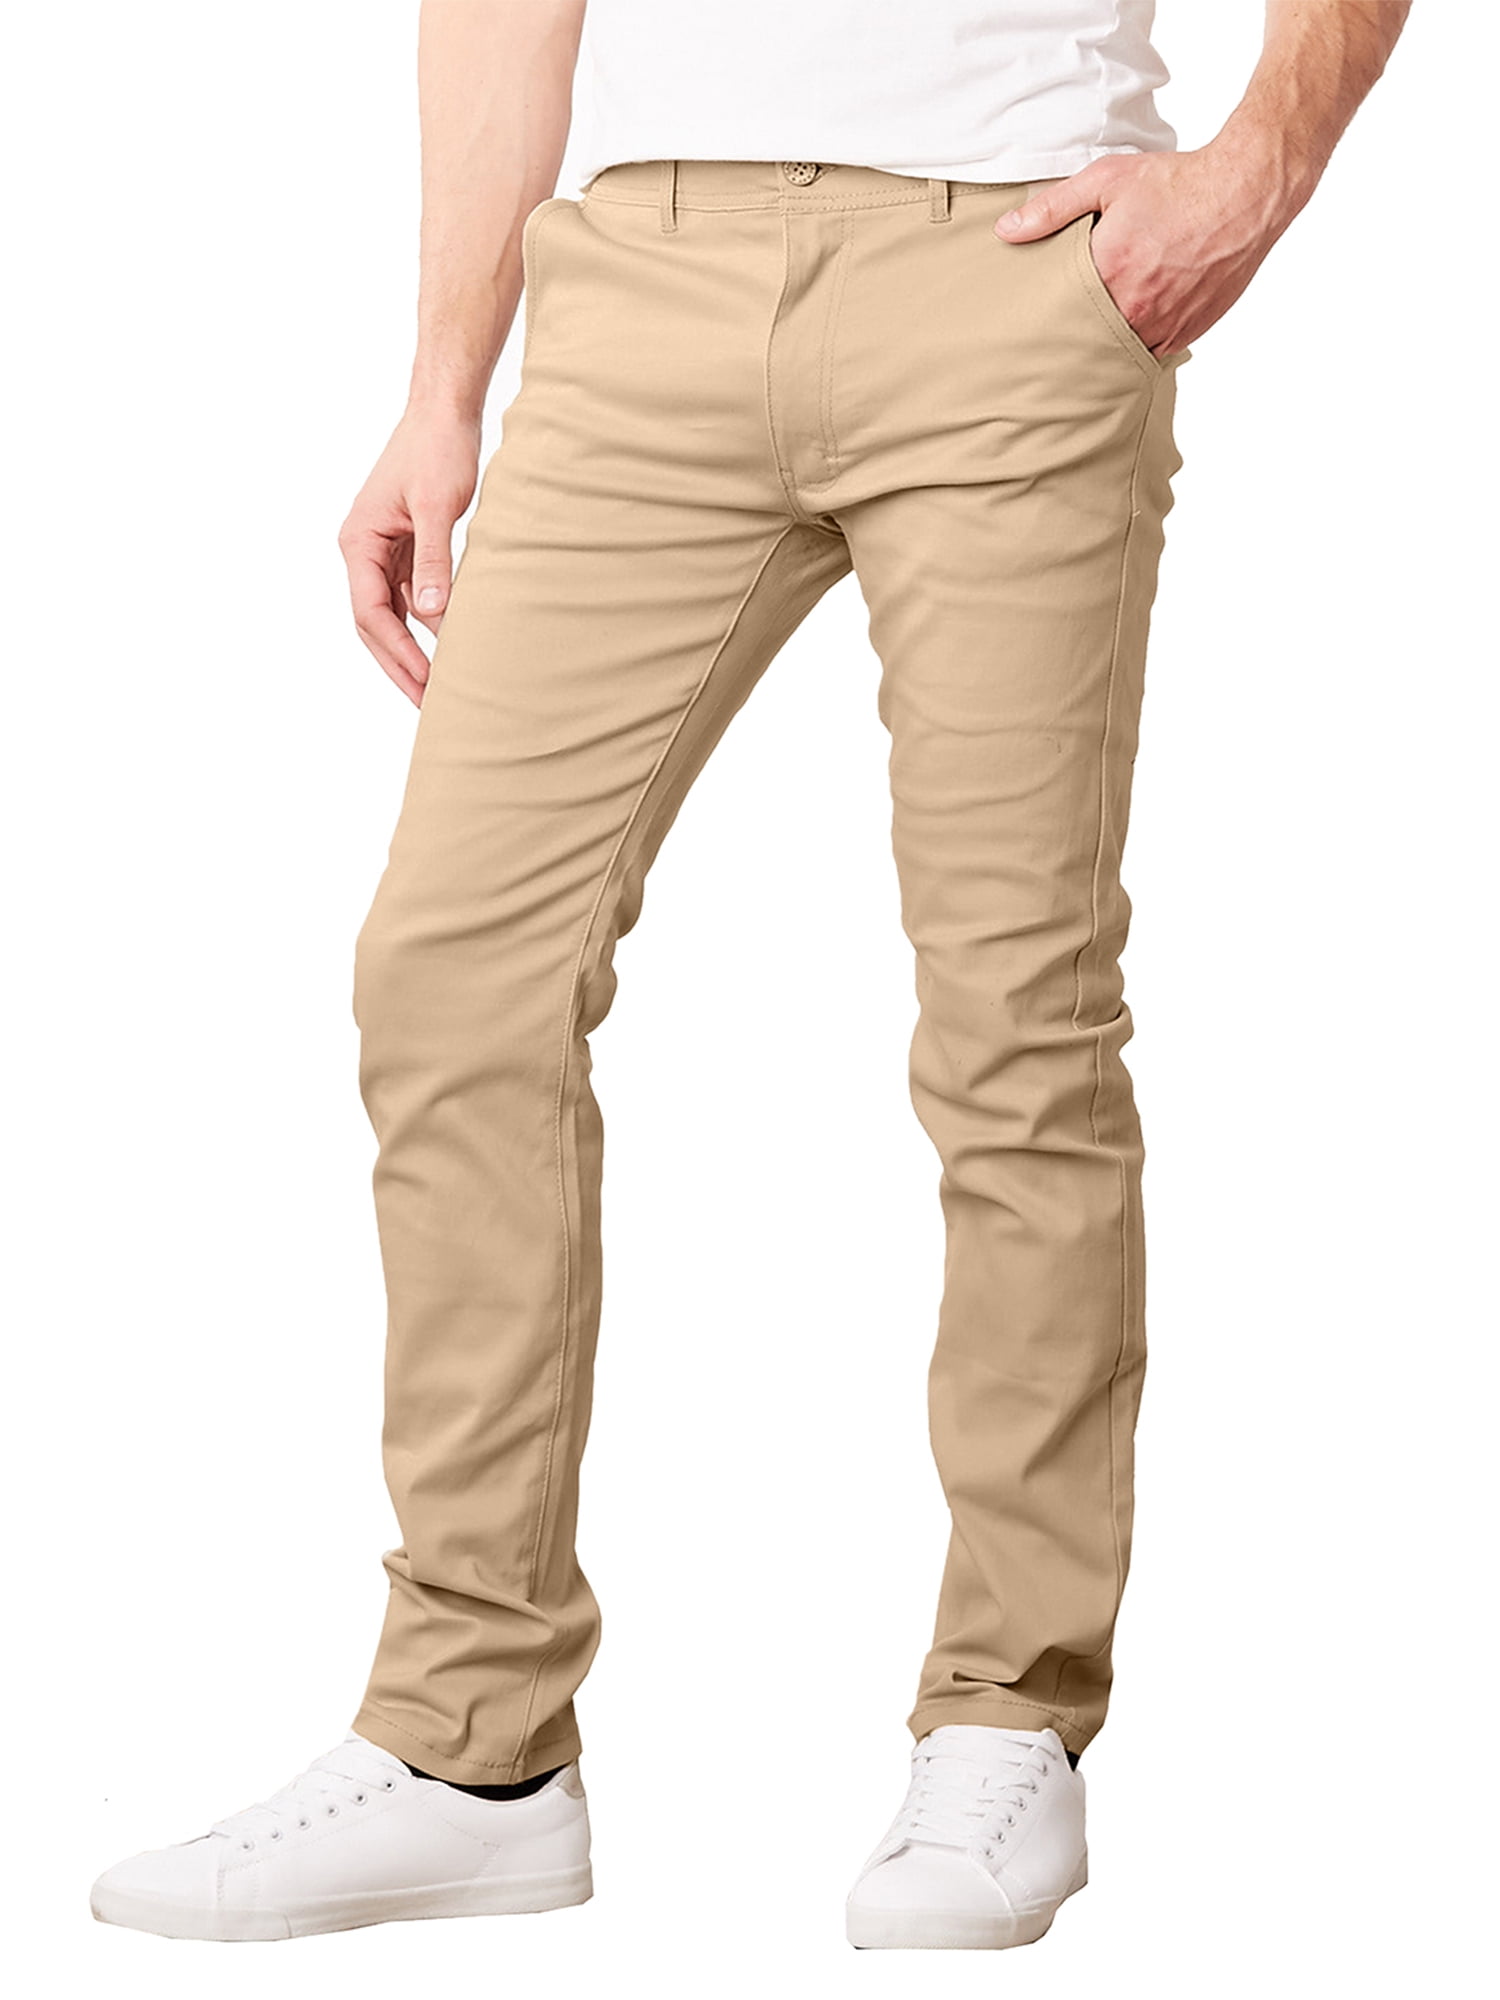 Men\'s Super Stretch Slim Fit Everyday Chino Pants (Sizes, 30-42)